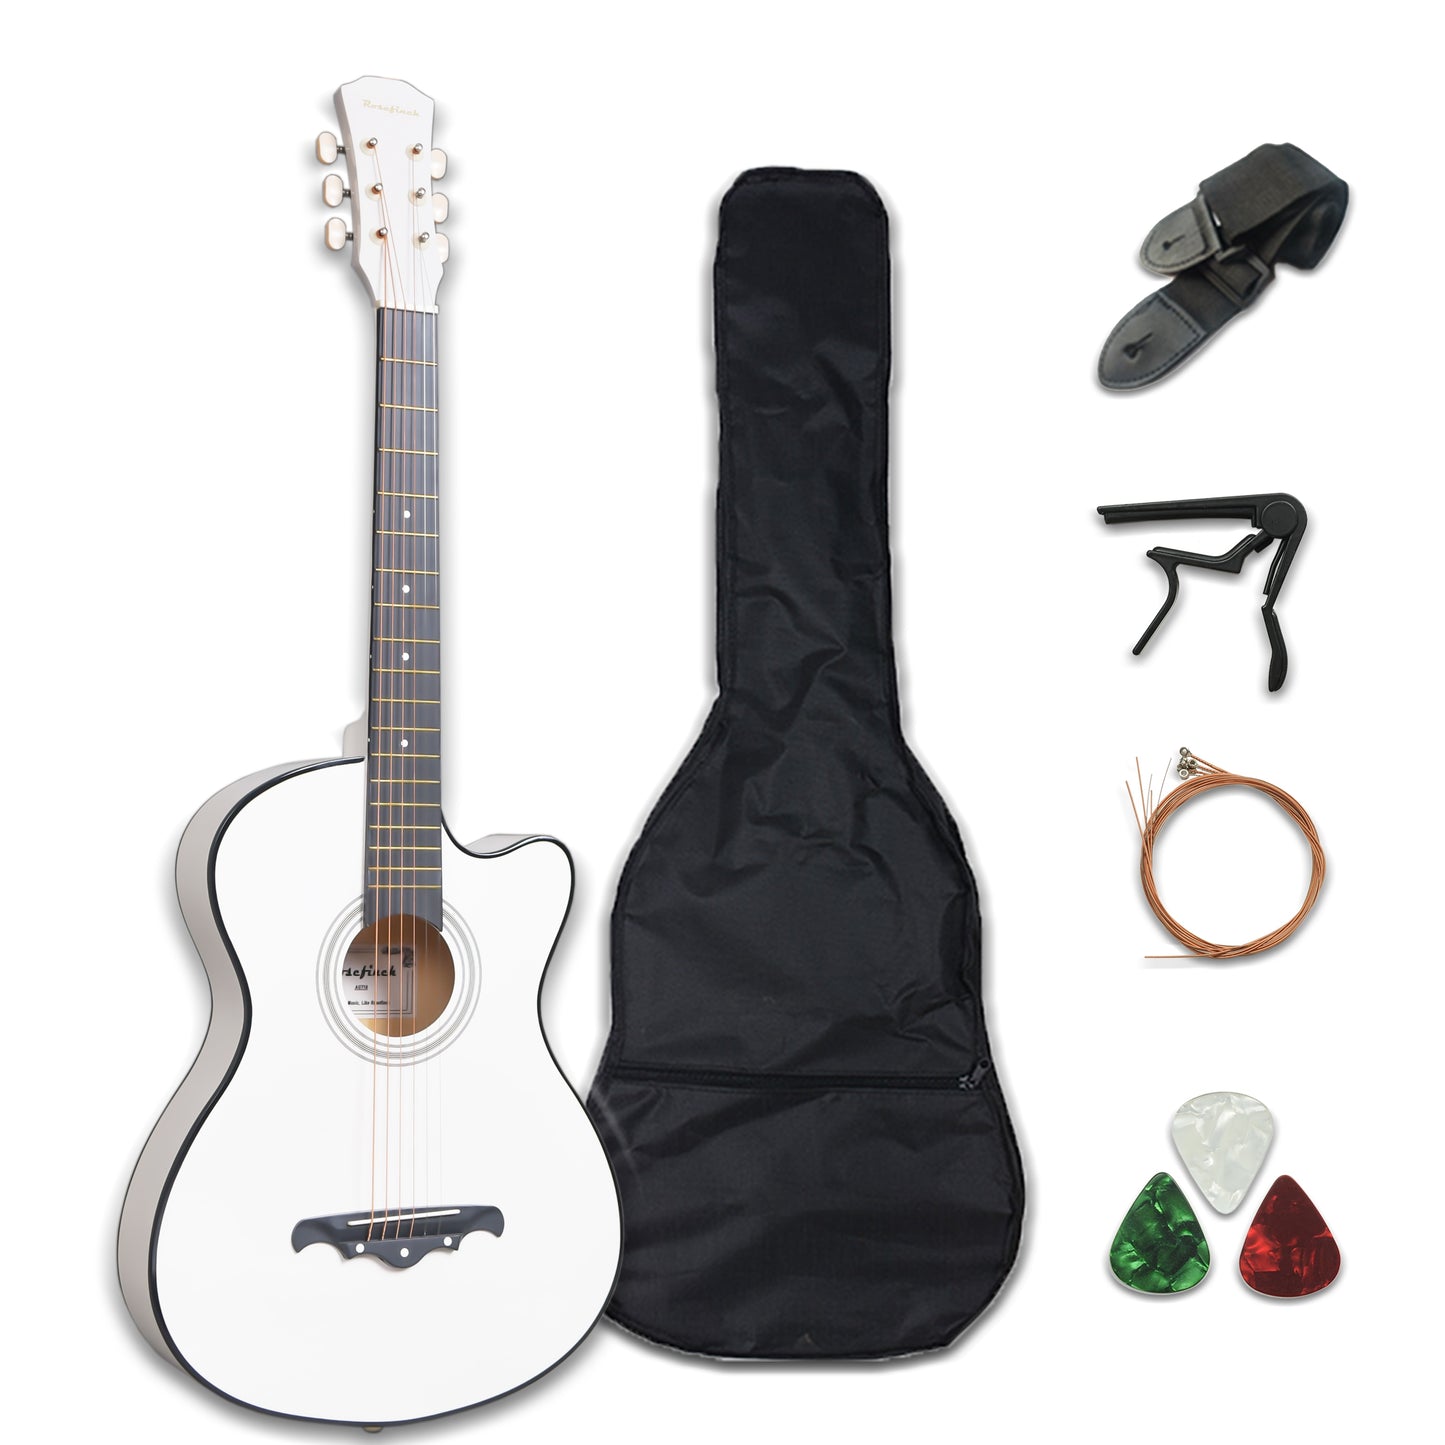 AGT16 41/38 Inch Acoustic Travel Guitar for Kids and  Adults, comes with Capo, Picks, Bag, and 6 Steel Strings